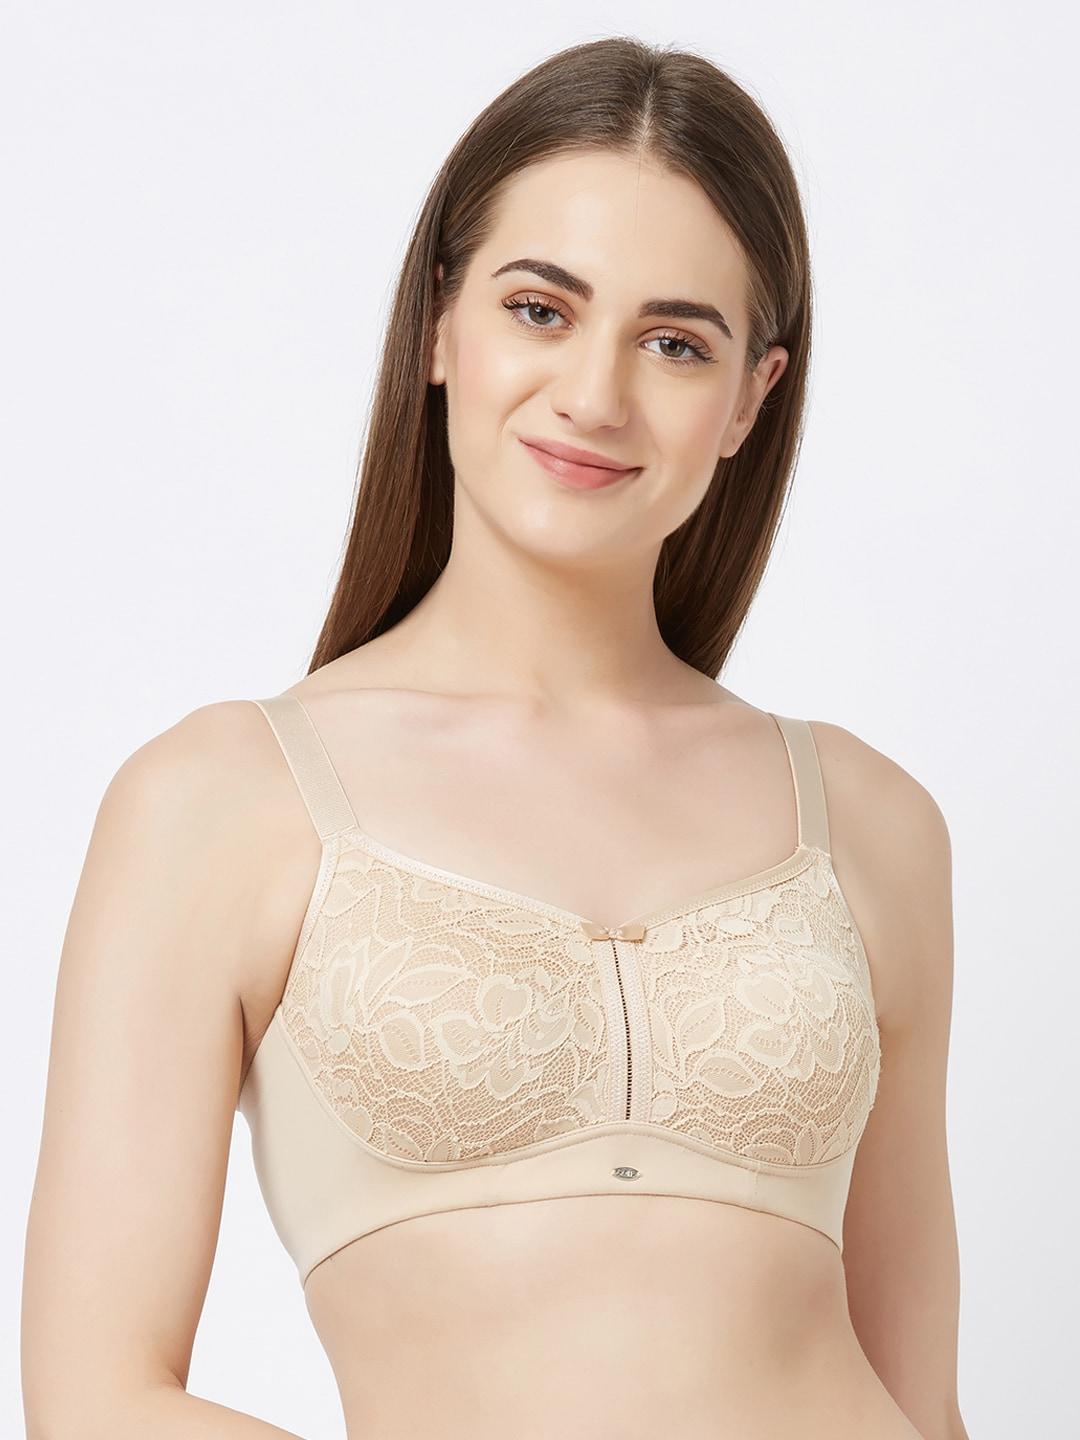 Soie Nude Lace Non-Wired Non Padded full coverage Everyday Bra FB-705nude